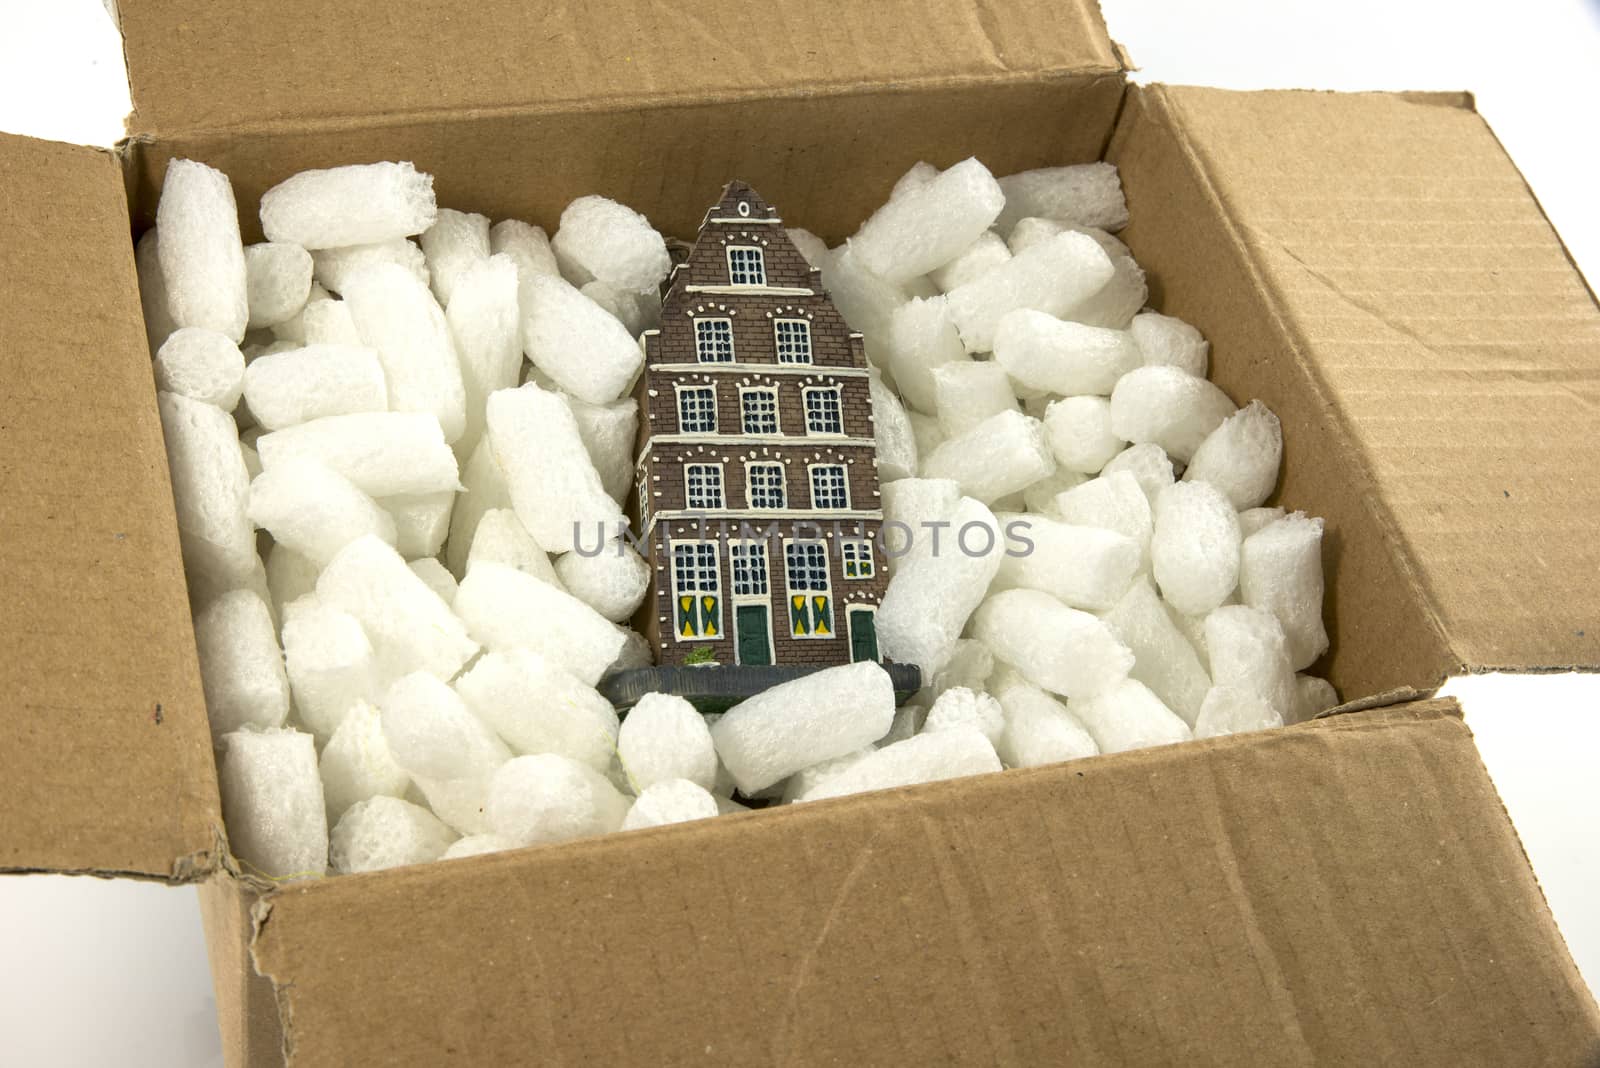 moving the house in cardboard box with shipping peanuts